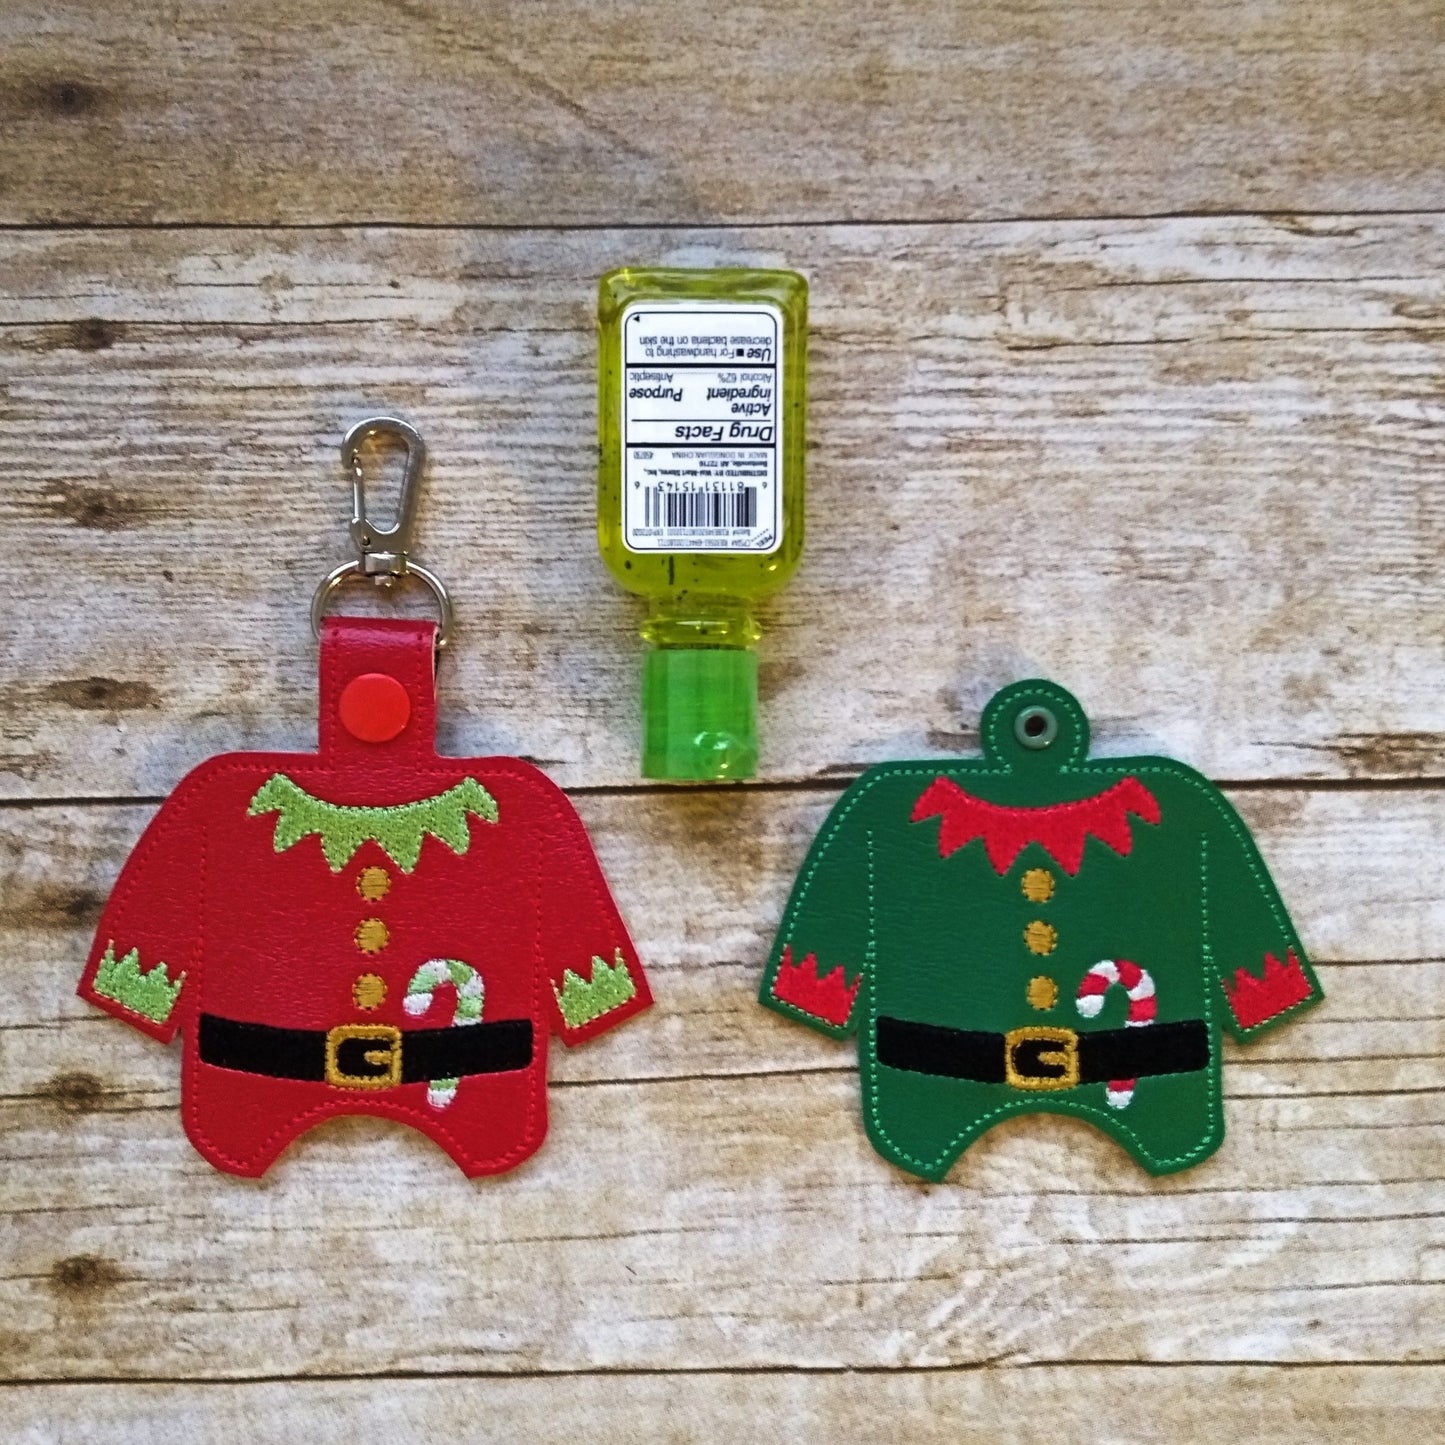 Elf Outfit Sanitizer Holders - Embroidery File, DIGITAL Embroidery DESIGN